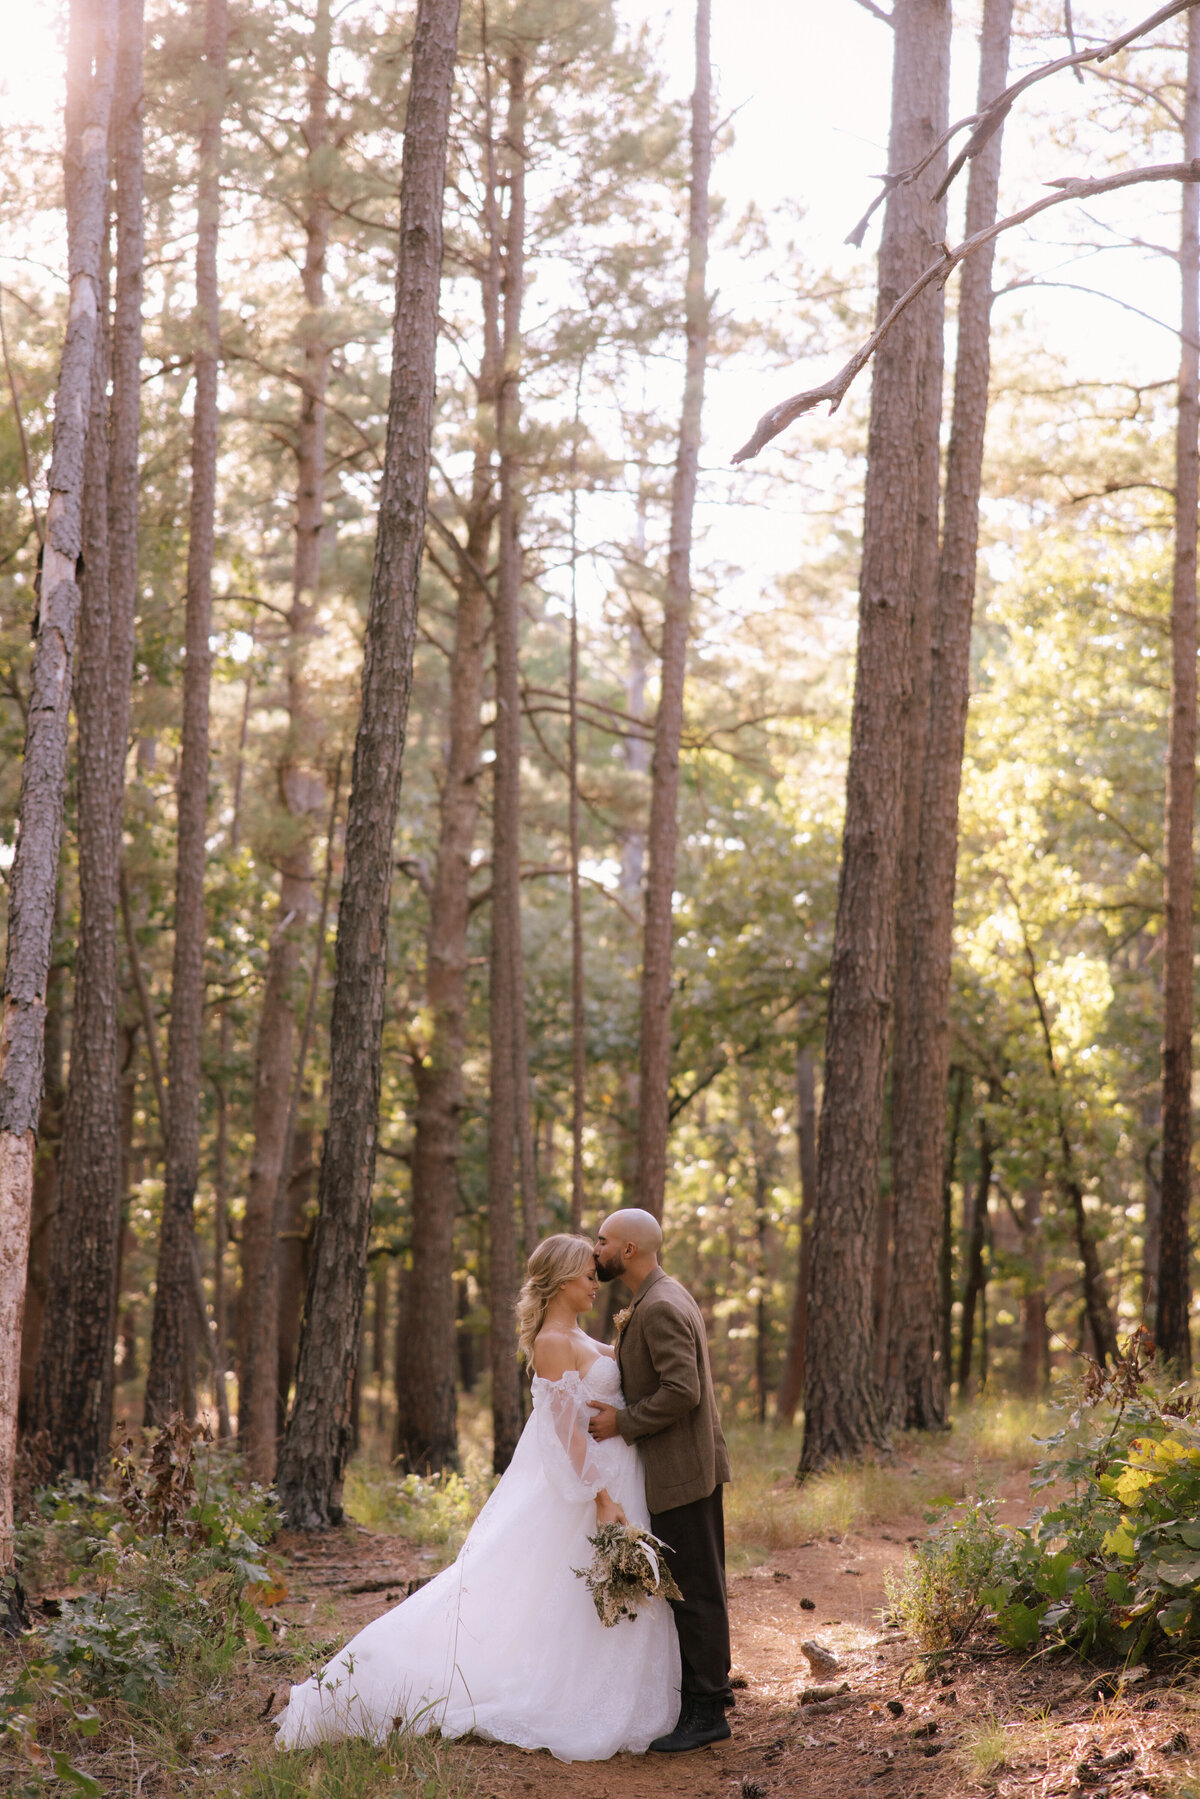 The Deep in the Heart Retreat | Amanda + Alfredo | Adventure Elopement at Tyler State Park | Alison Faith Photography-6309